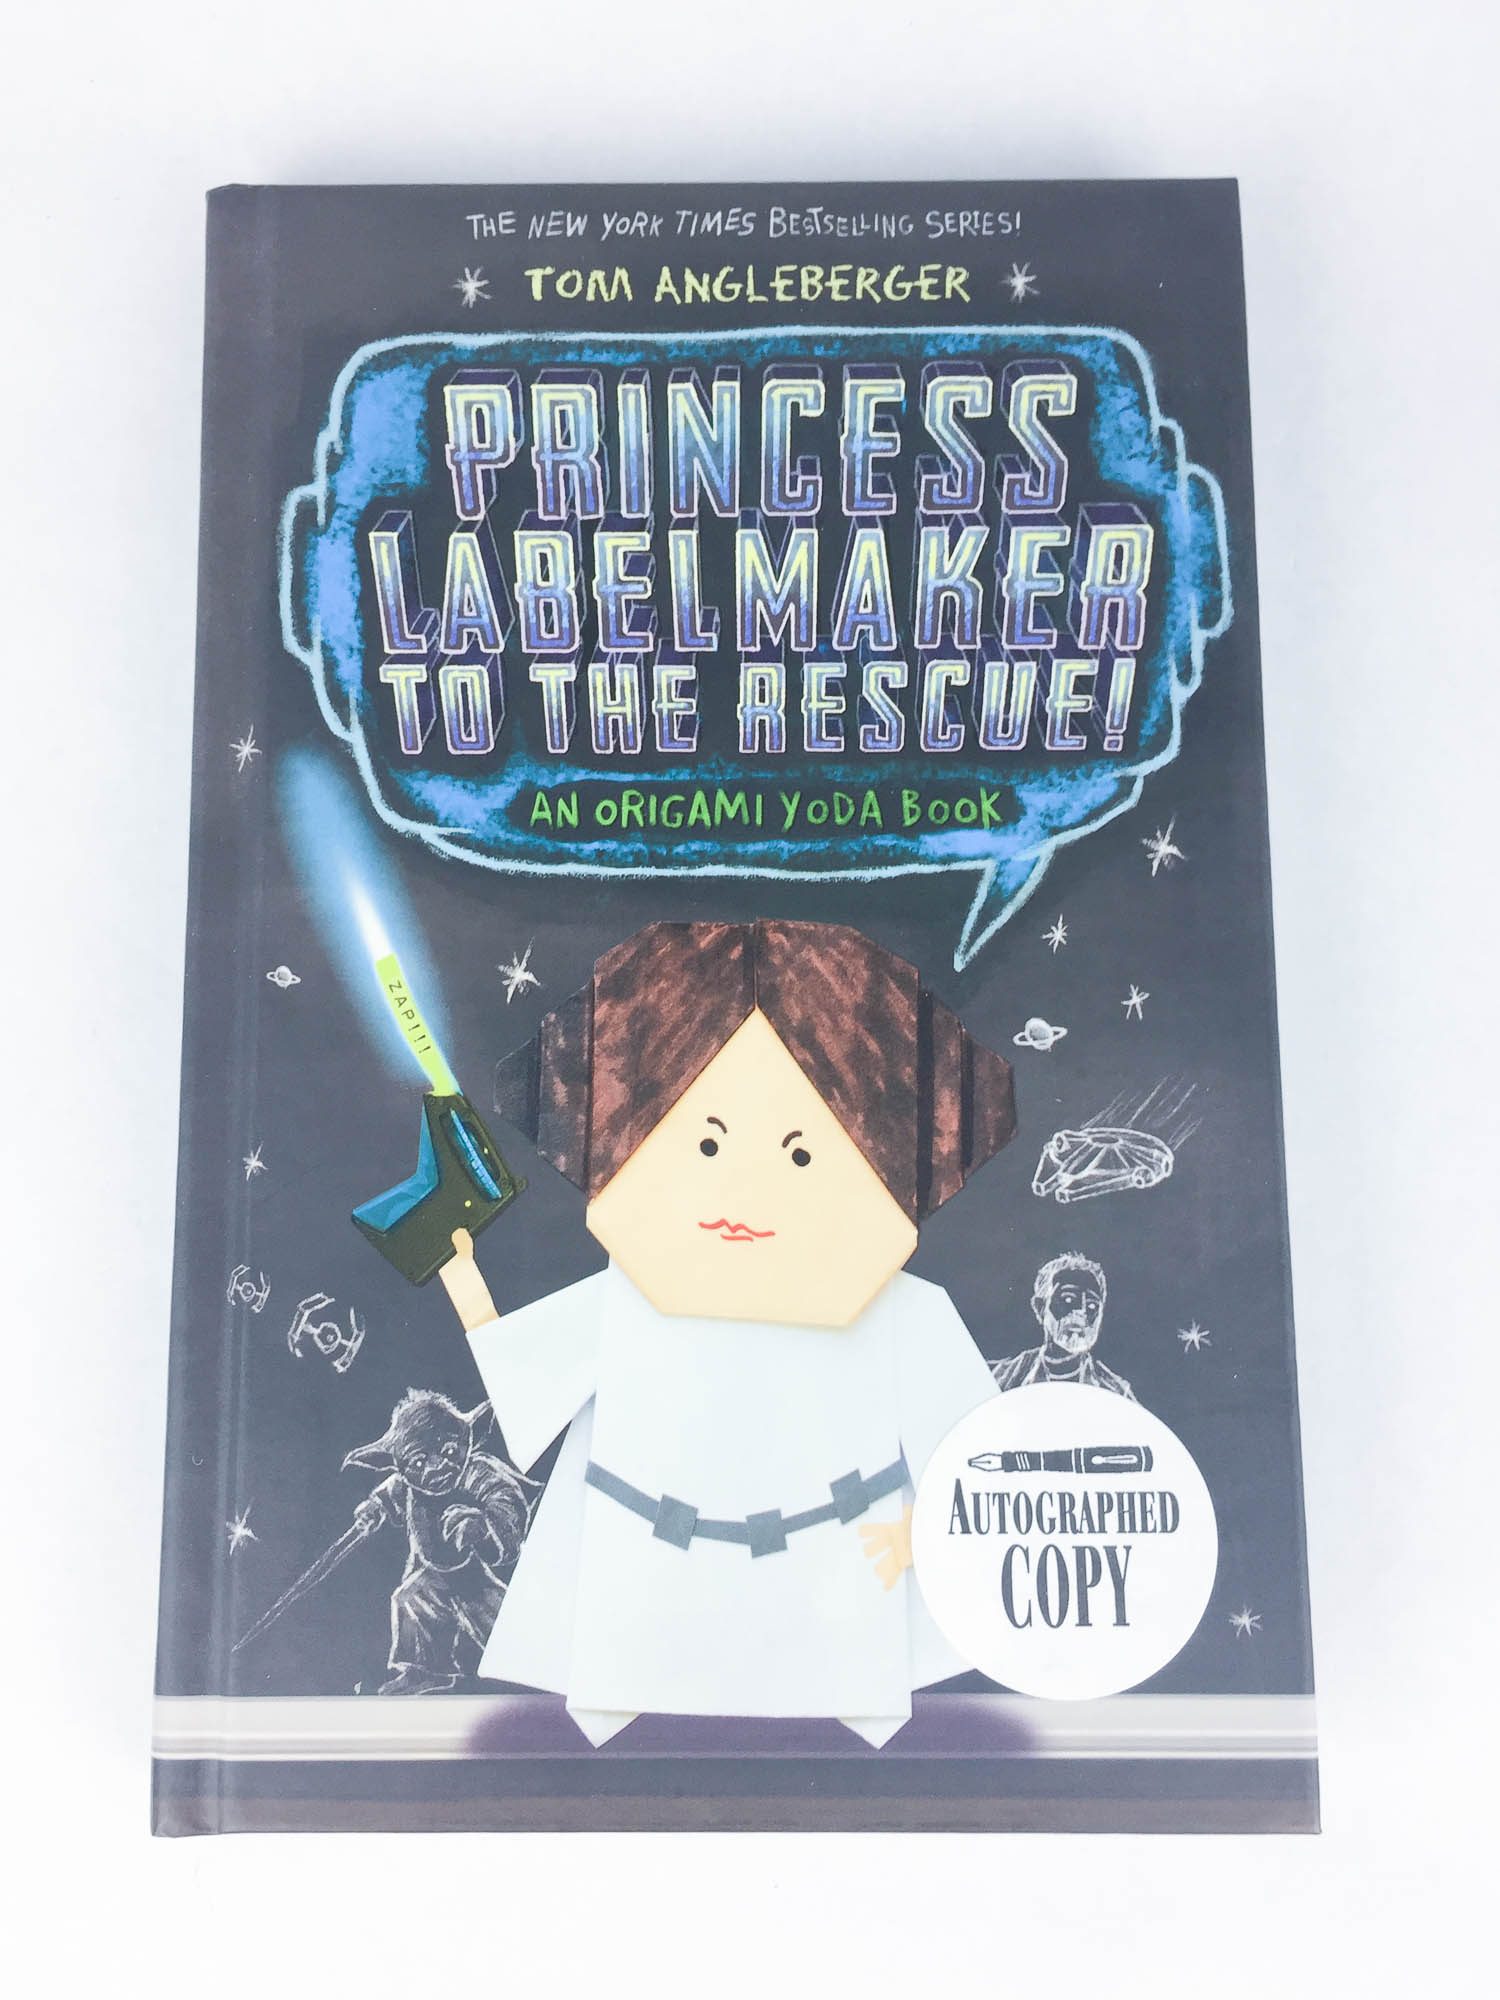 Funtime Origami Yoda Signed Princess Labelmaker To The Rescue Tom Angleberger